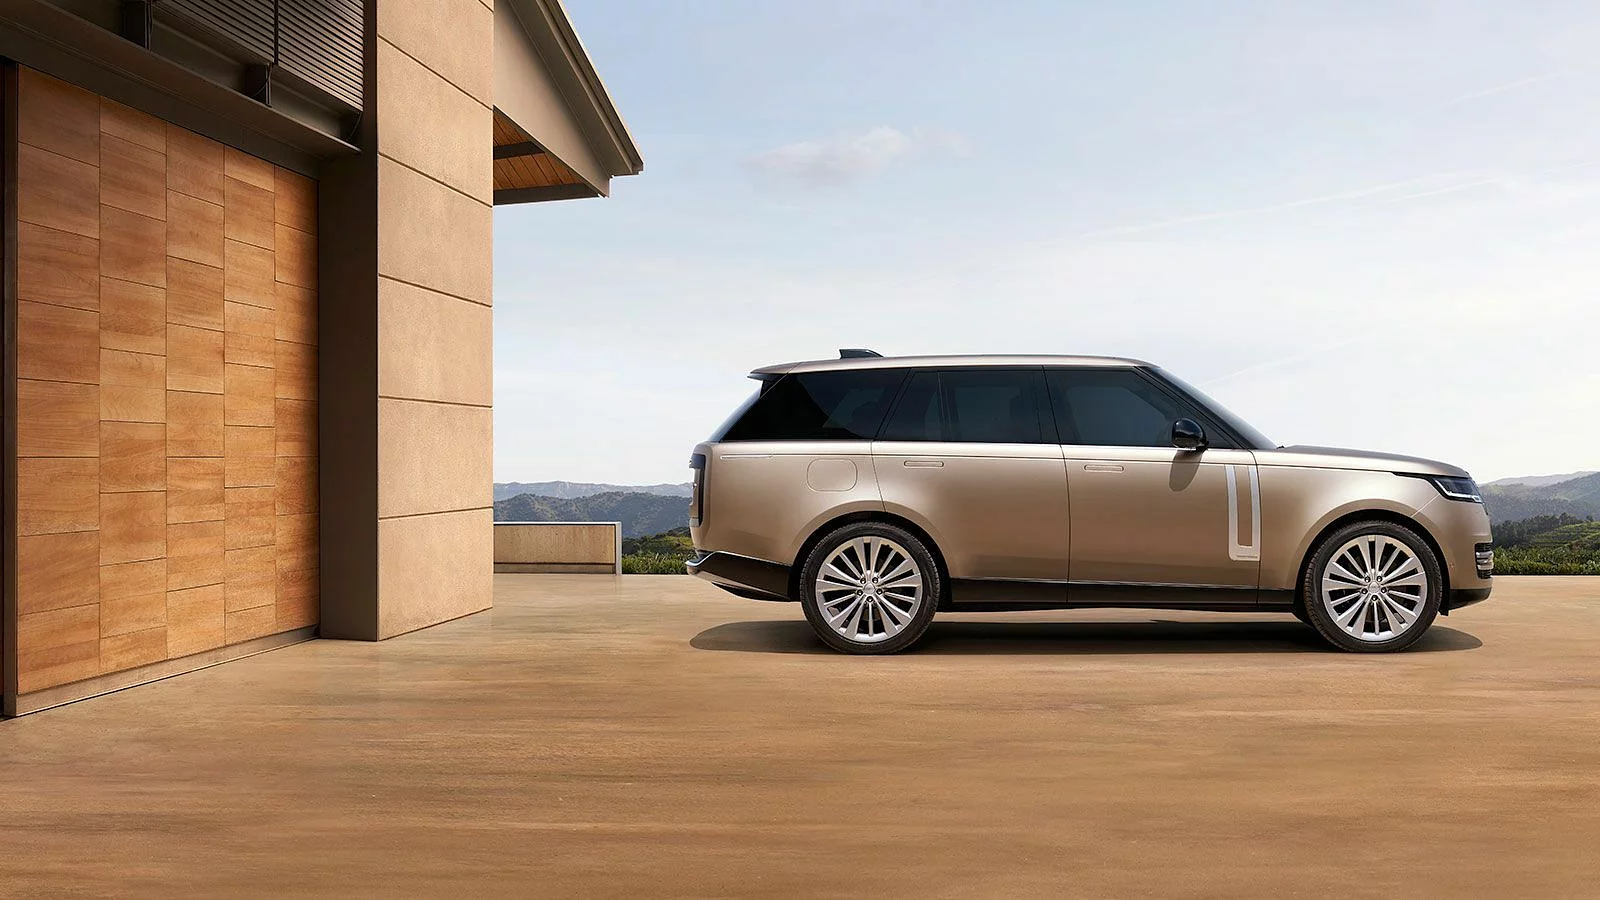 <span style="font-size:1.25rem">RANGE ROVER</span><br>SPECIFICATION